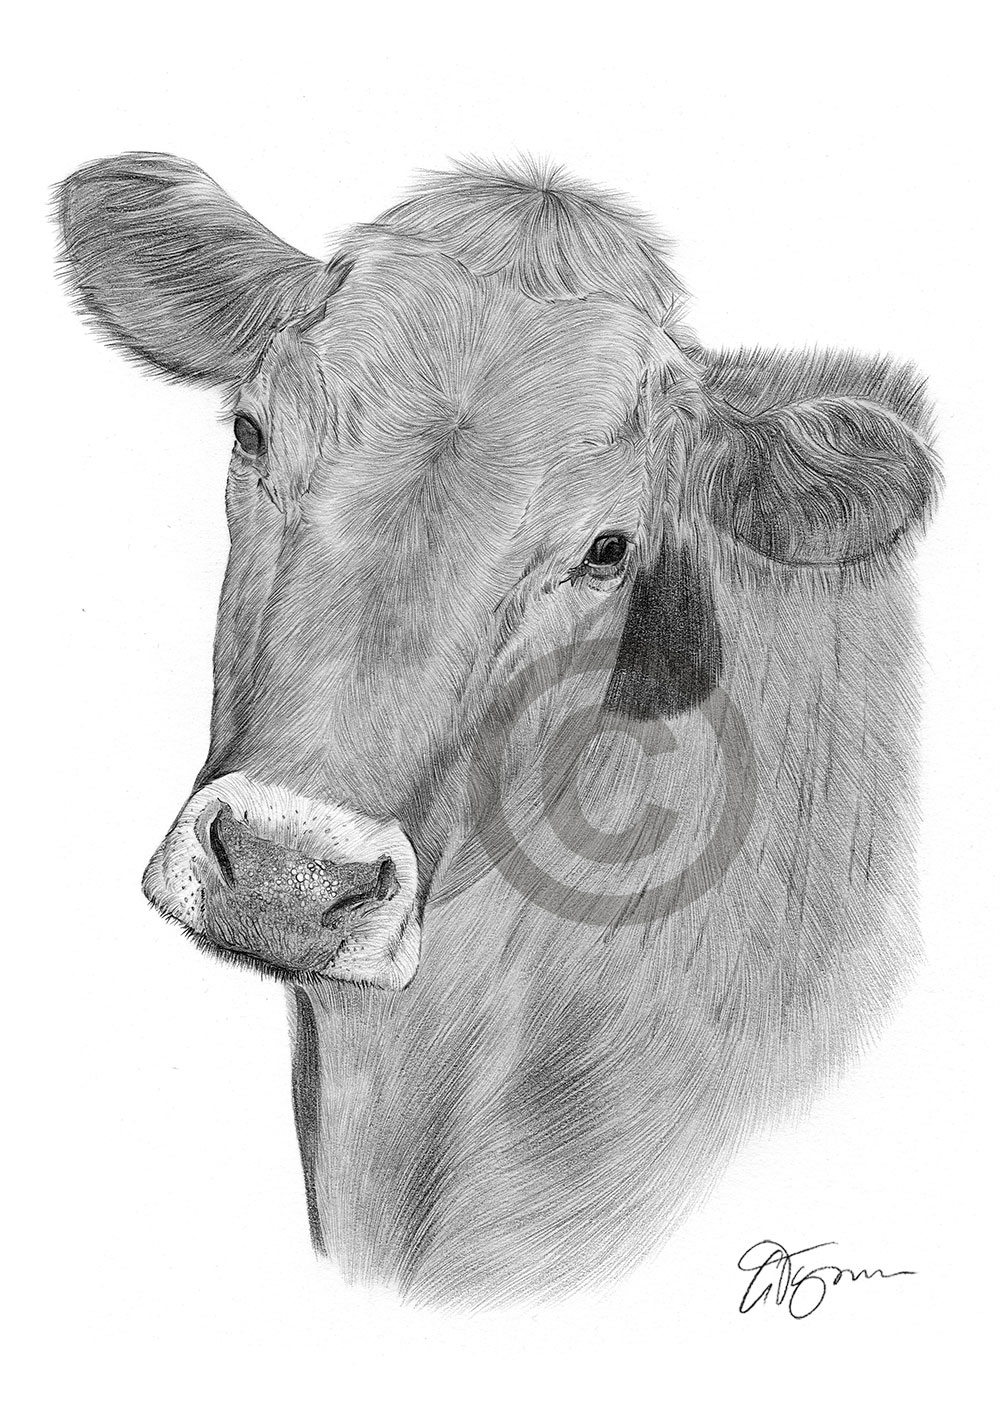 Pencil drawing of a cow by artist Gary Tymon